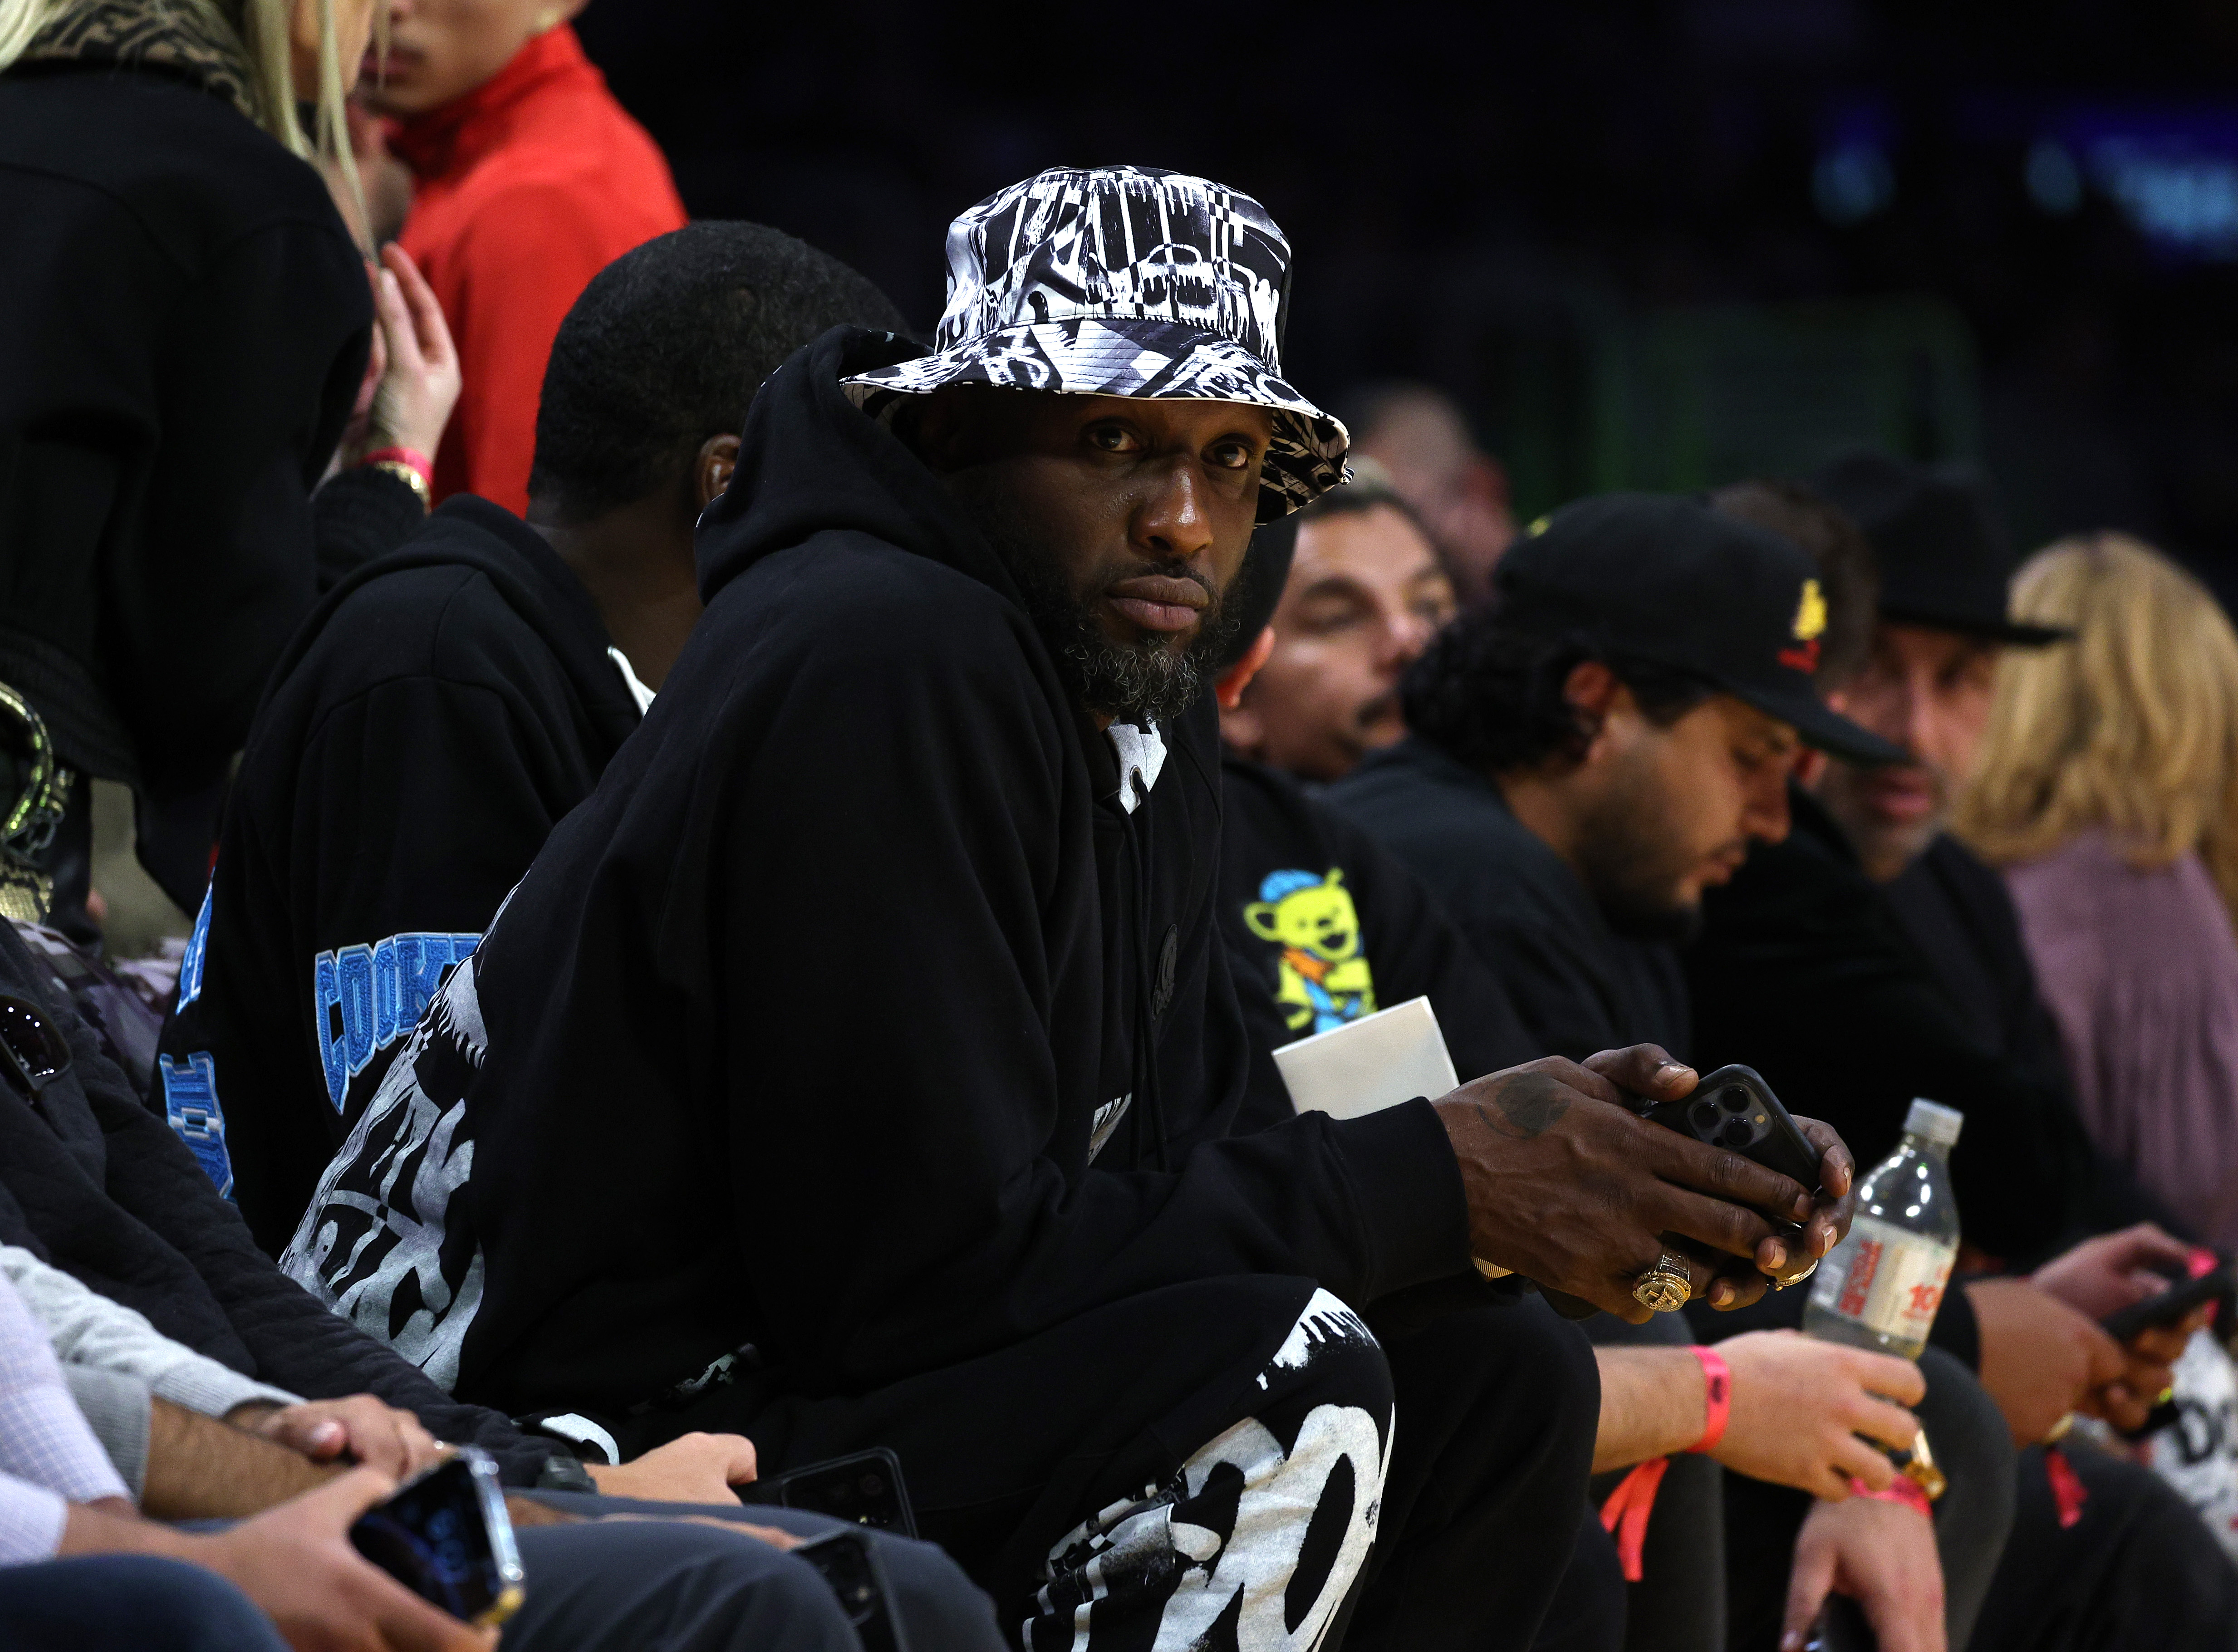 Lamar Odom sits courtside for the game between the New Orleans Pelicans and the Los Angeles Lakers at Crypto.com Arena on November 02, 2022 in Los Angeles, California. | Source: Getty Images